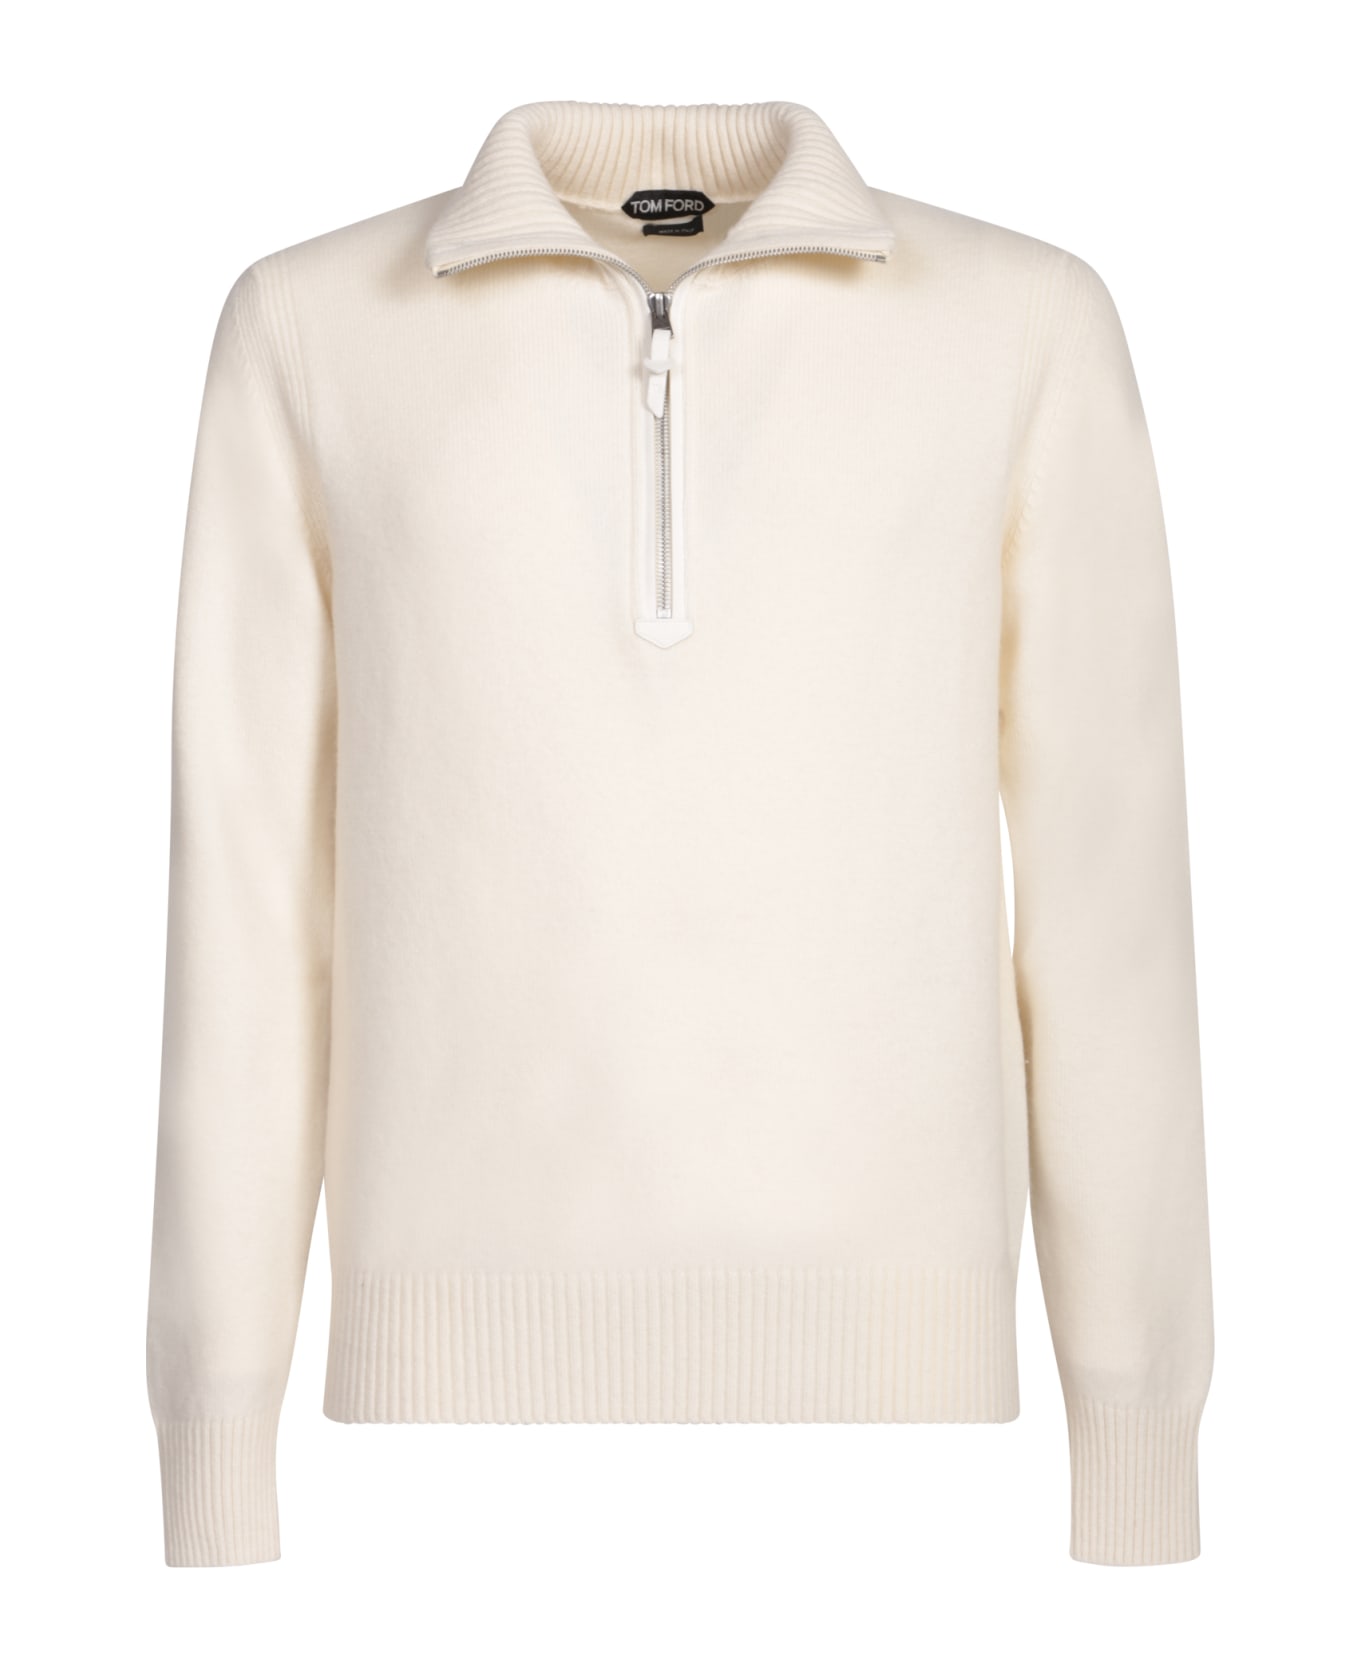 Tom Ford White Long-sleeve Sweater With Zip-up Mock Neck In Wool And Cashmere Man - White ニットウェア